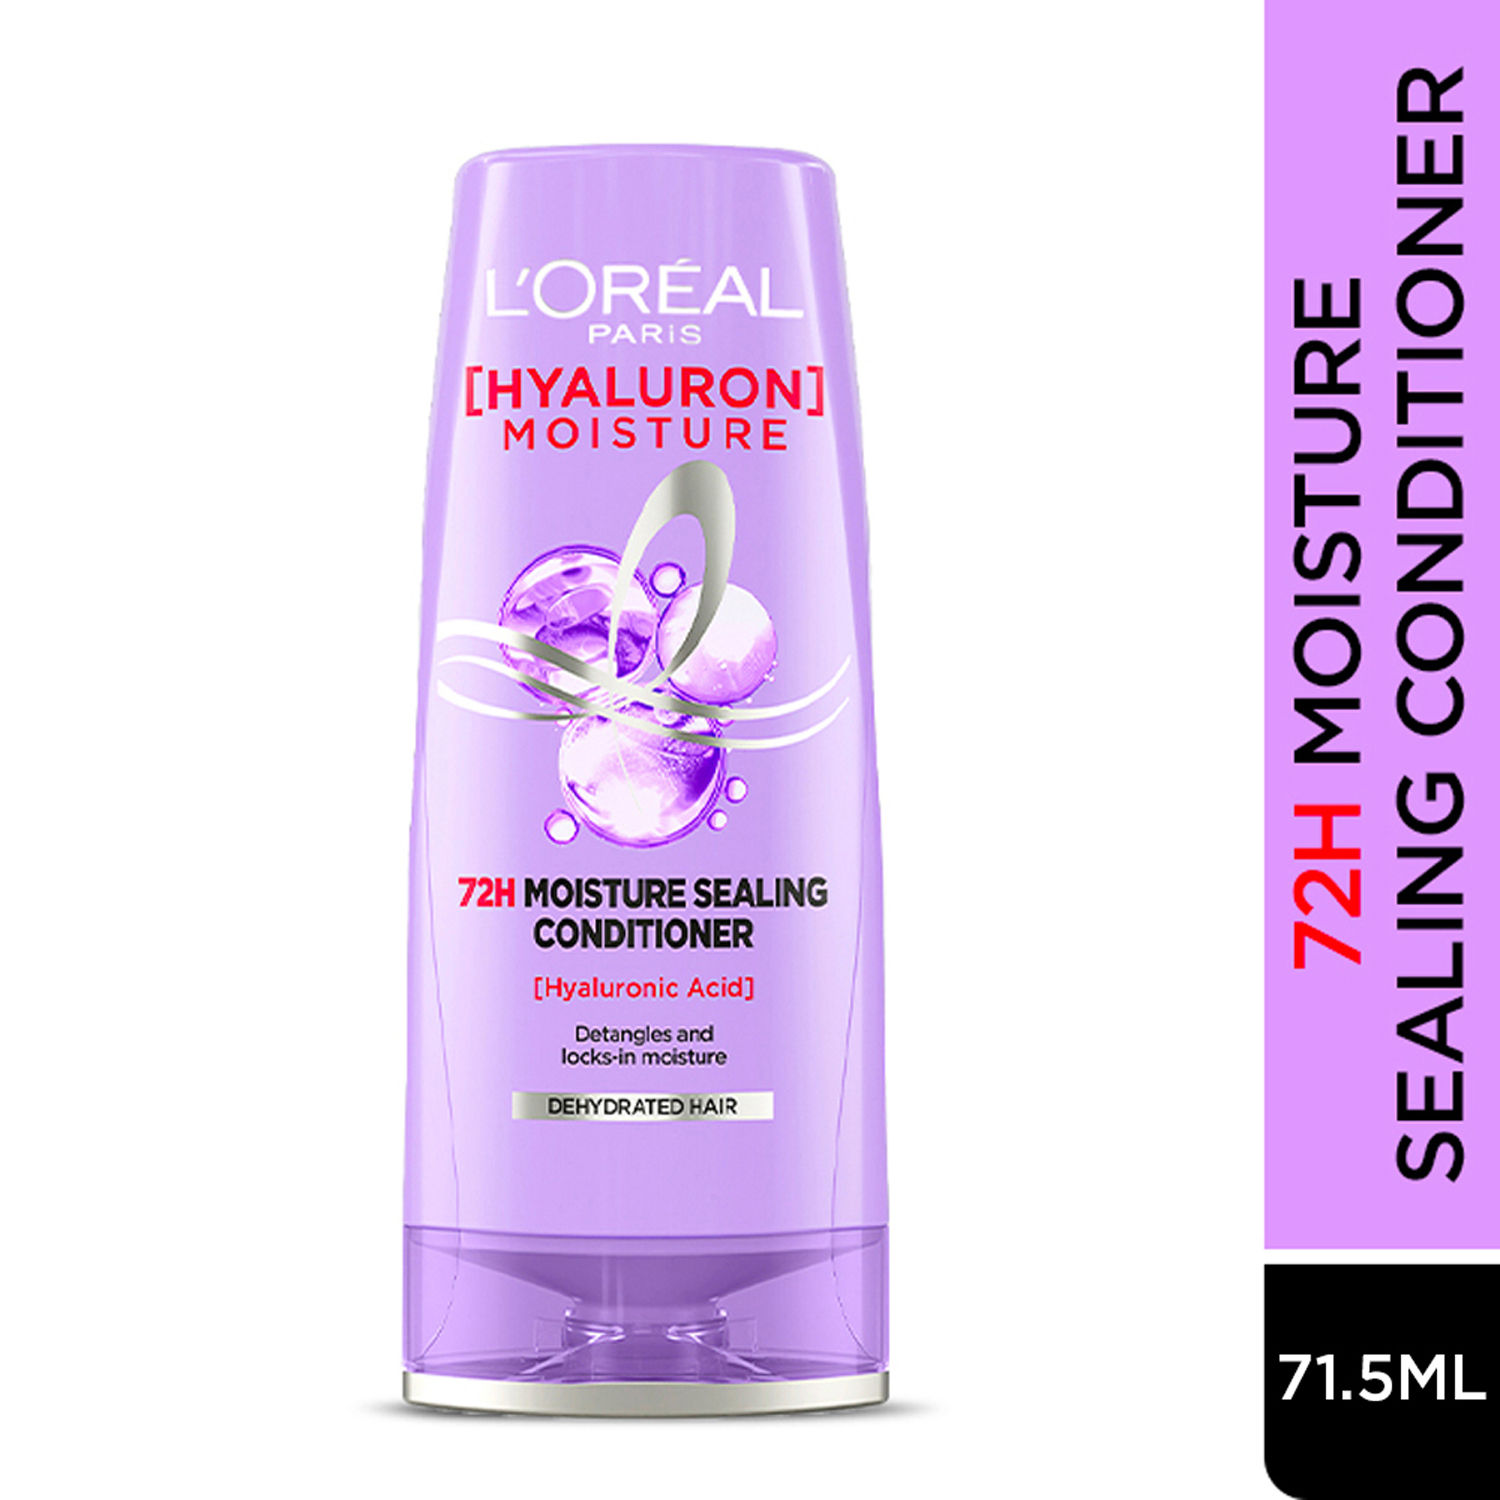 Buy L'Oreal Paris Hyaluron Moisture 72H Moisture Sealing Conditioner | With Hyaluronic Acid | For Dry & Dehydrated Hair | Adds Shine & Bounce 71.5ml - Purplle